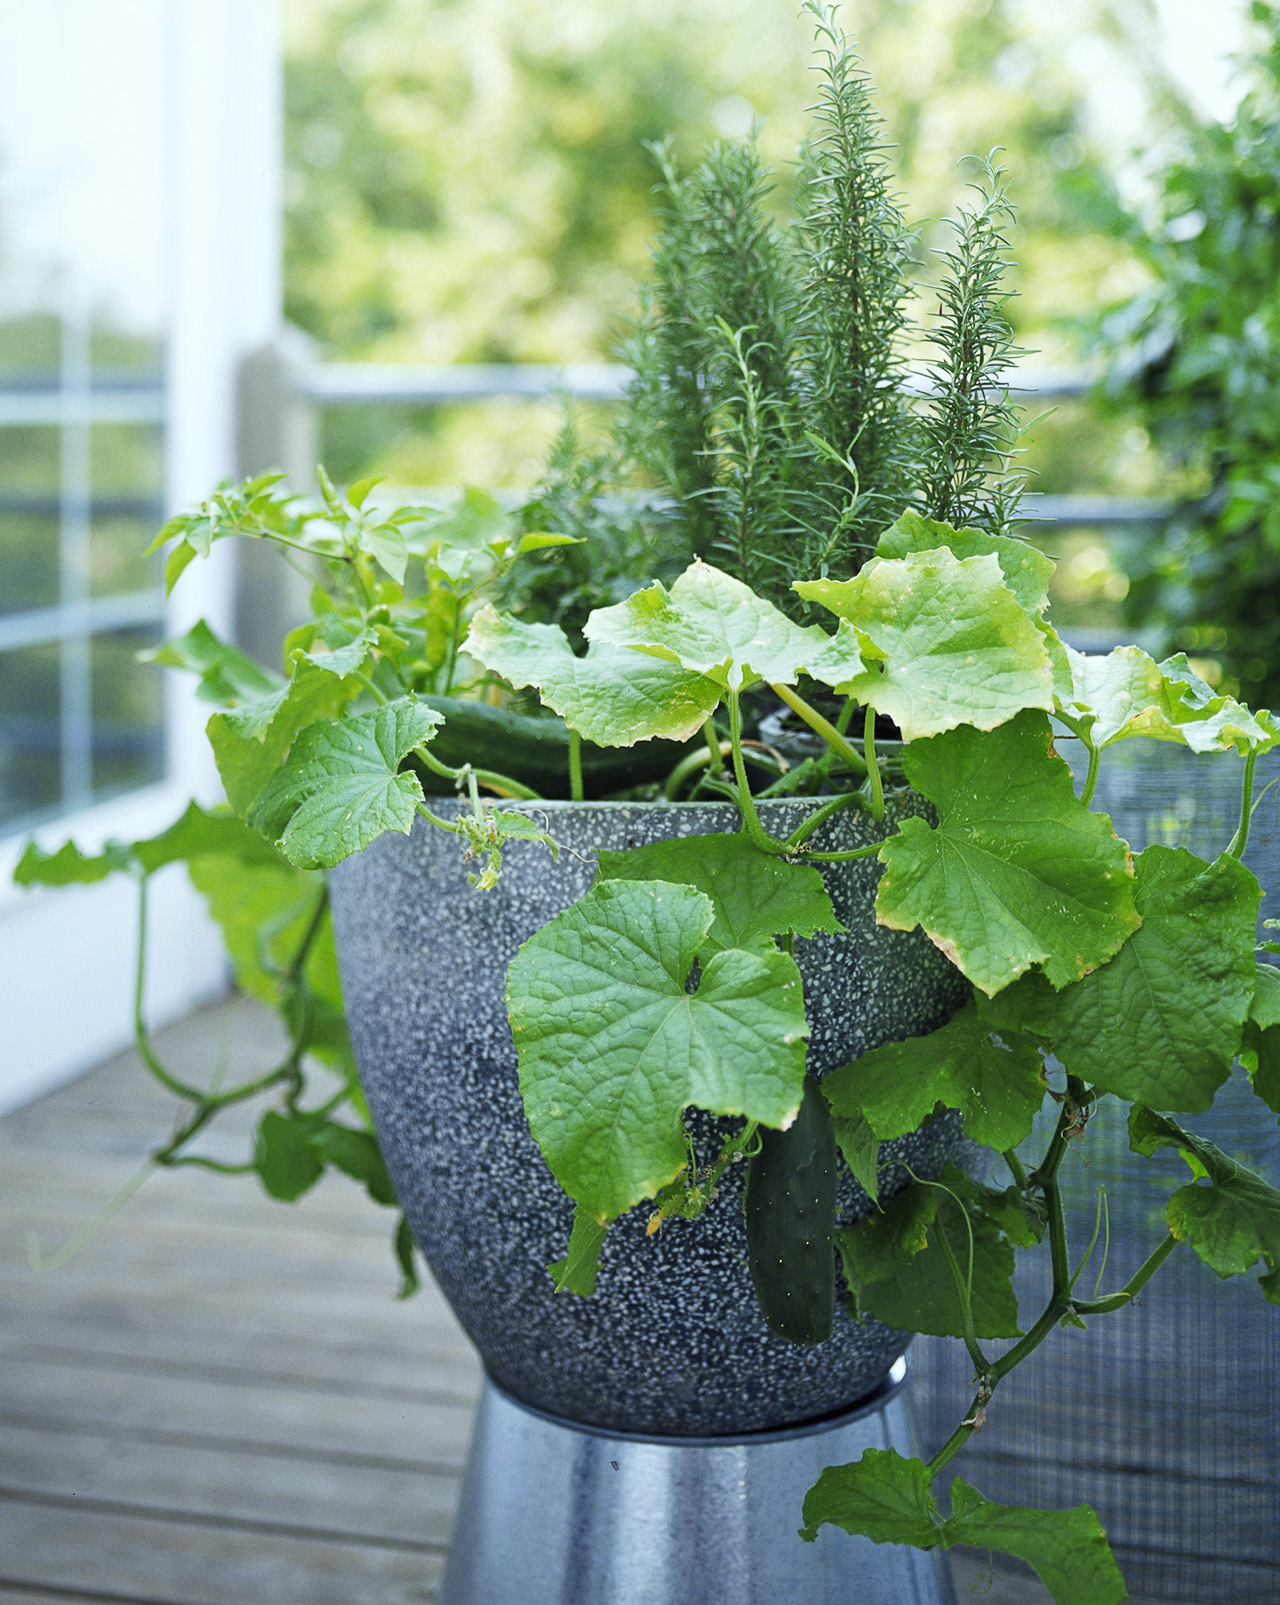 Vining vegetables in containers